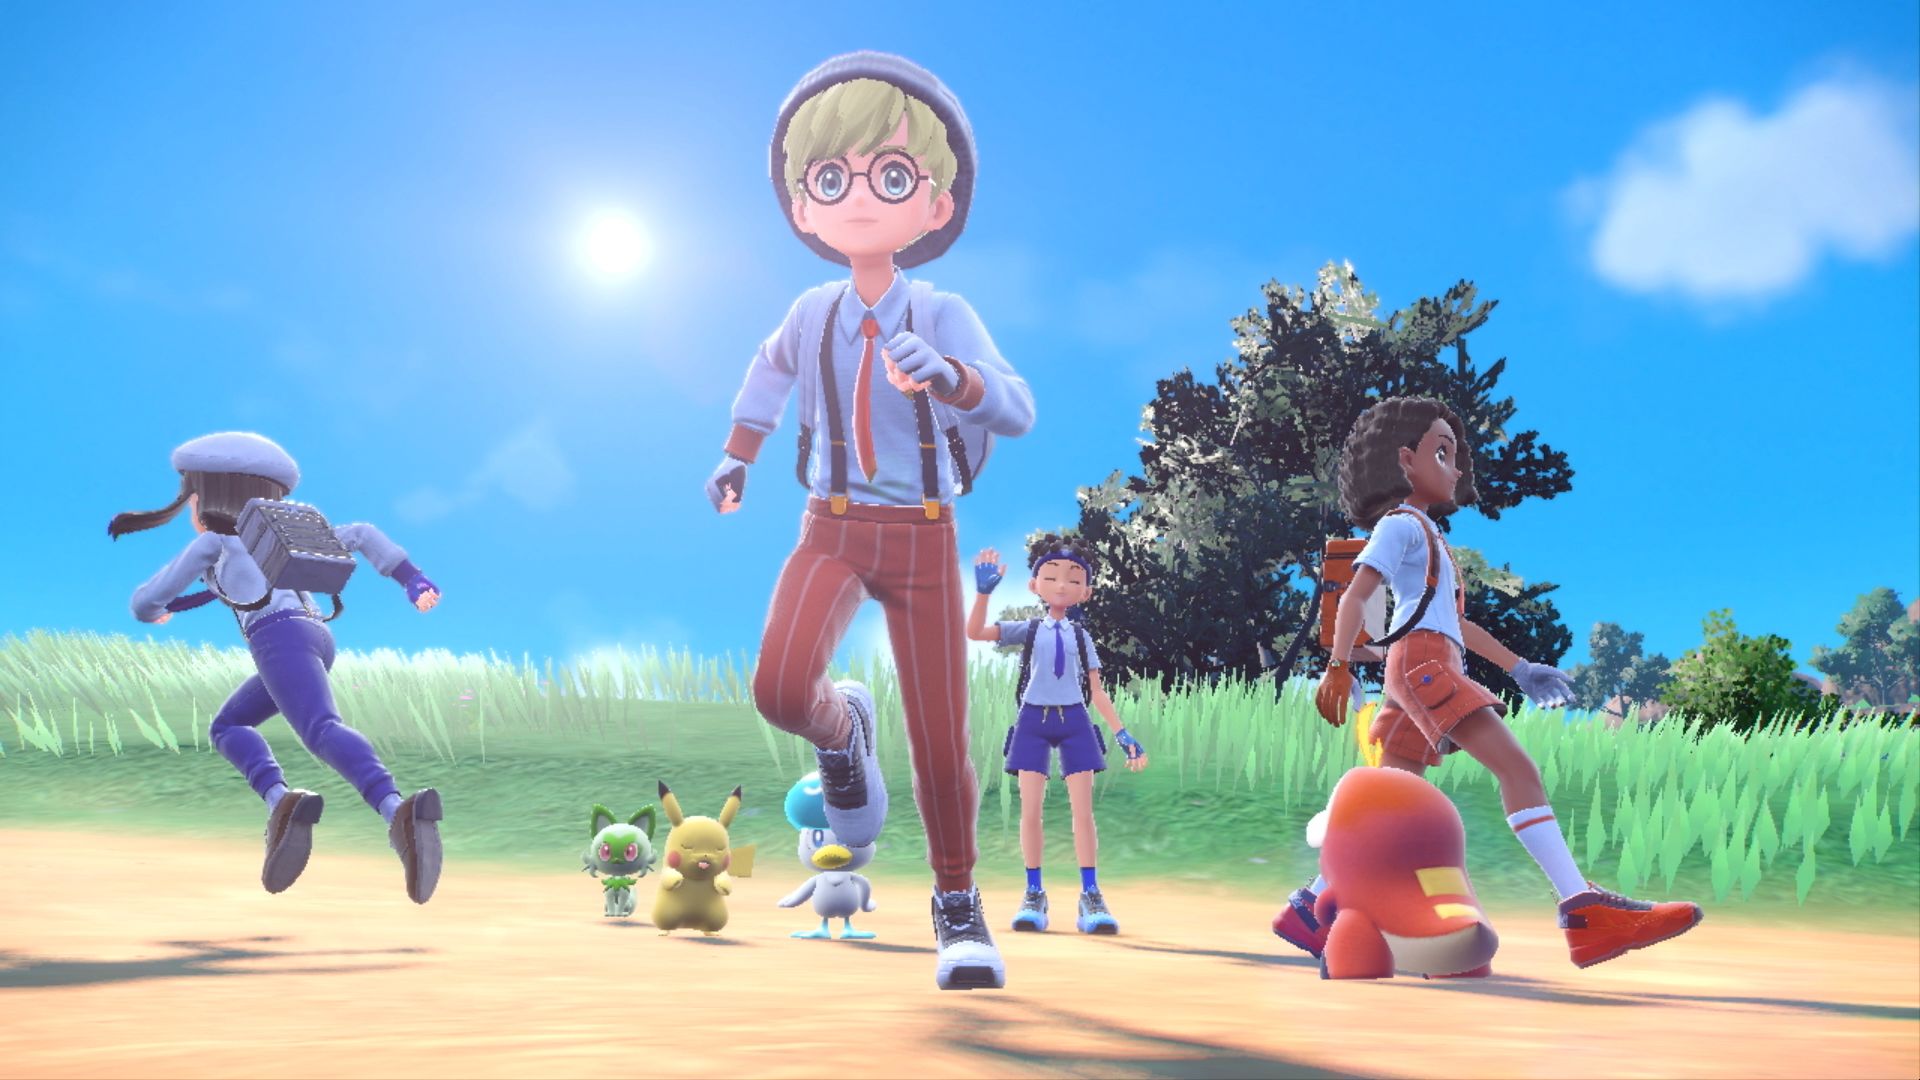 A screenshot of 'Pokémon Scarlet' and 'Pokémon Violet' for our article about the August 2022 Pokémon Presents. It sees four trainers standing with their Pokémon, which include Pikachu, Quaxly, Fuecoco, and Sprigatito.